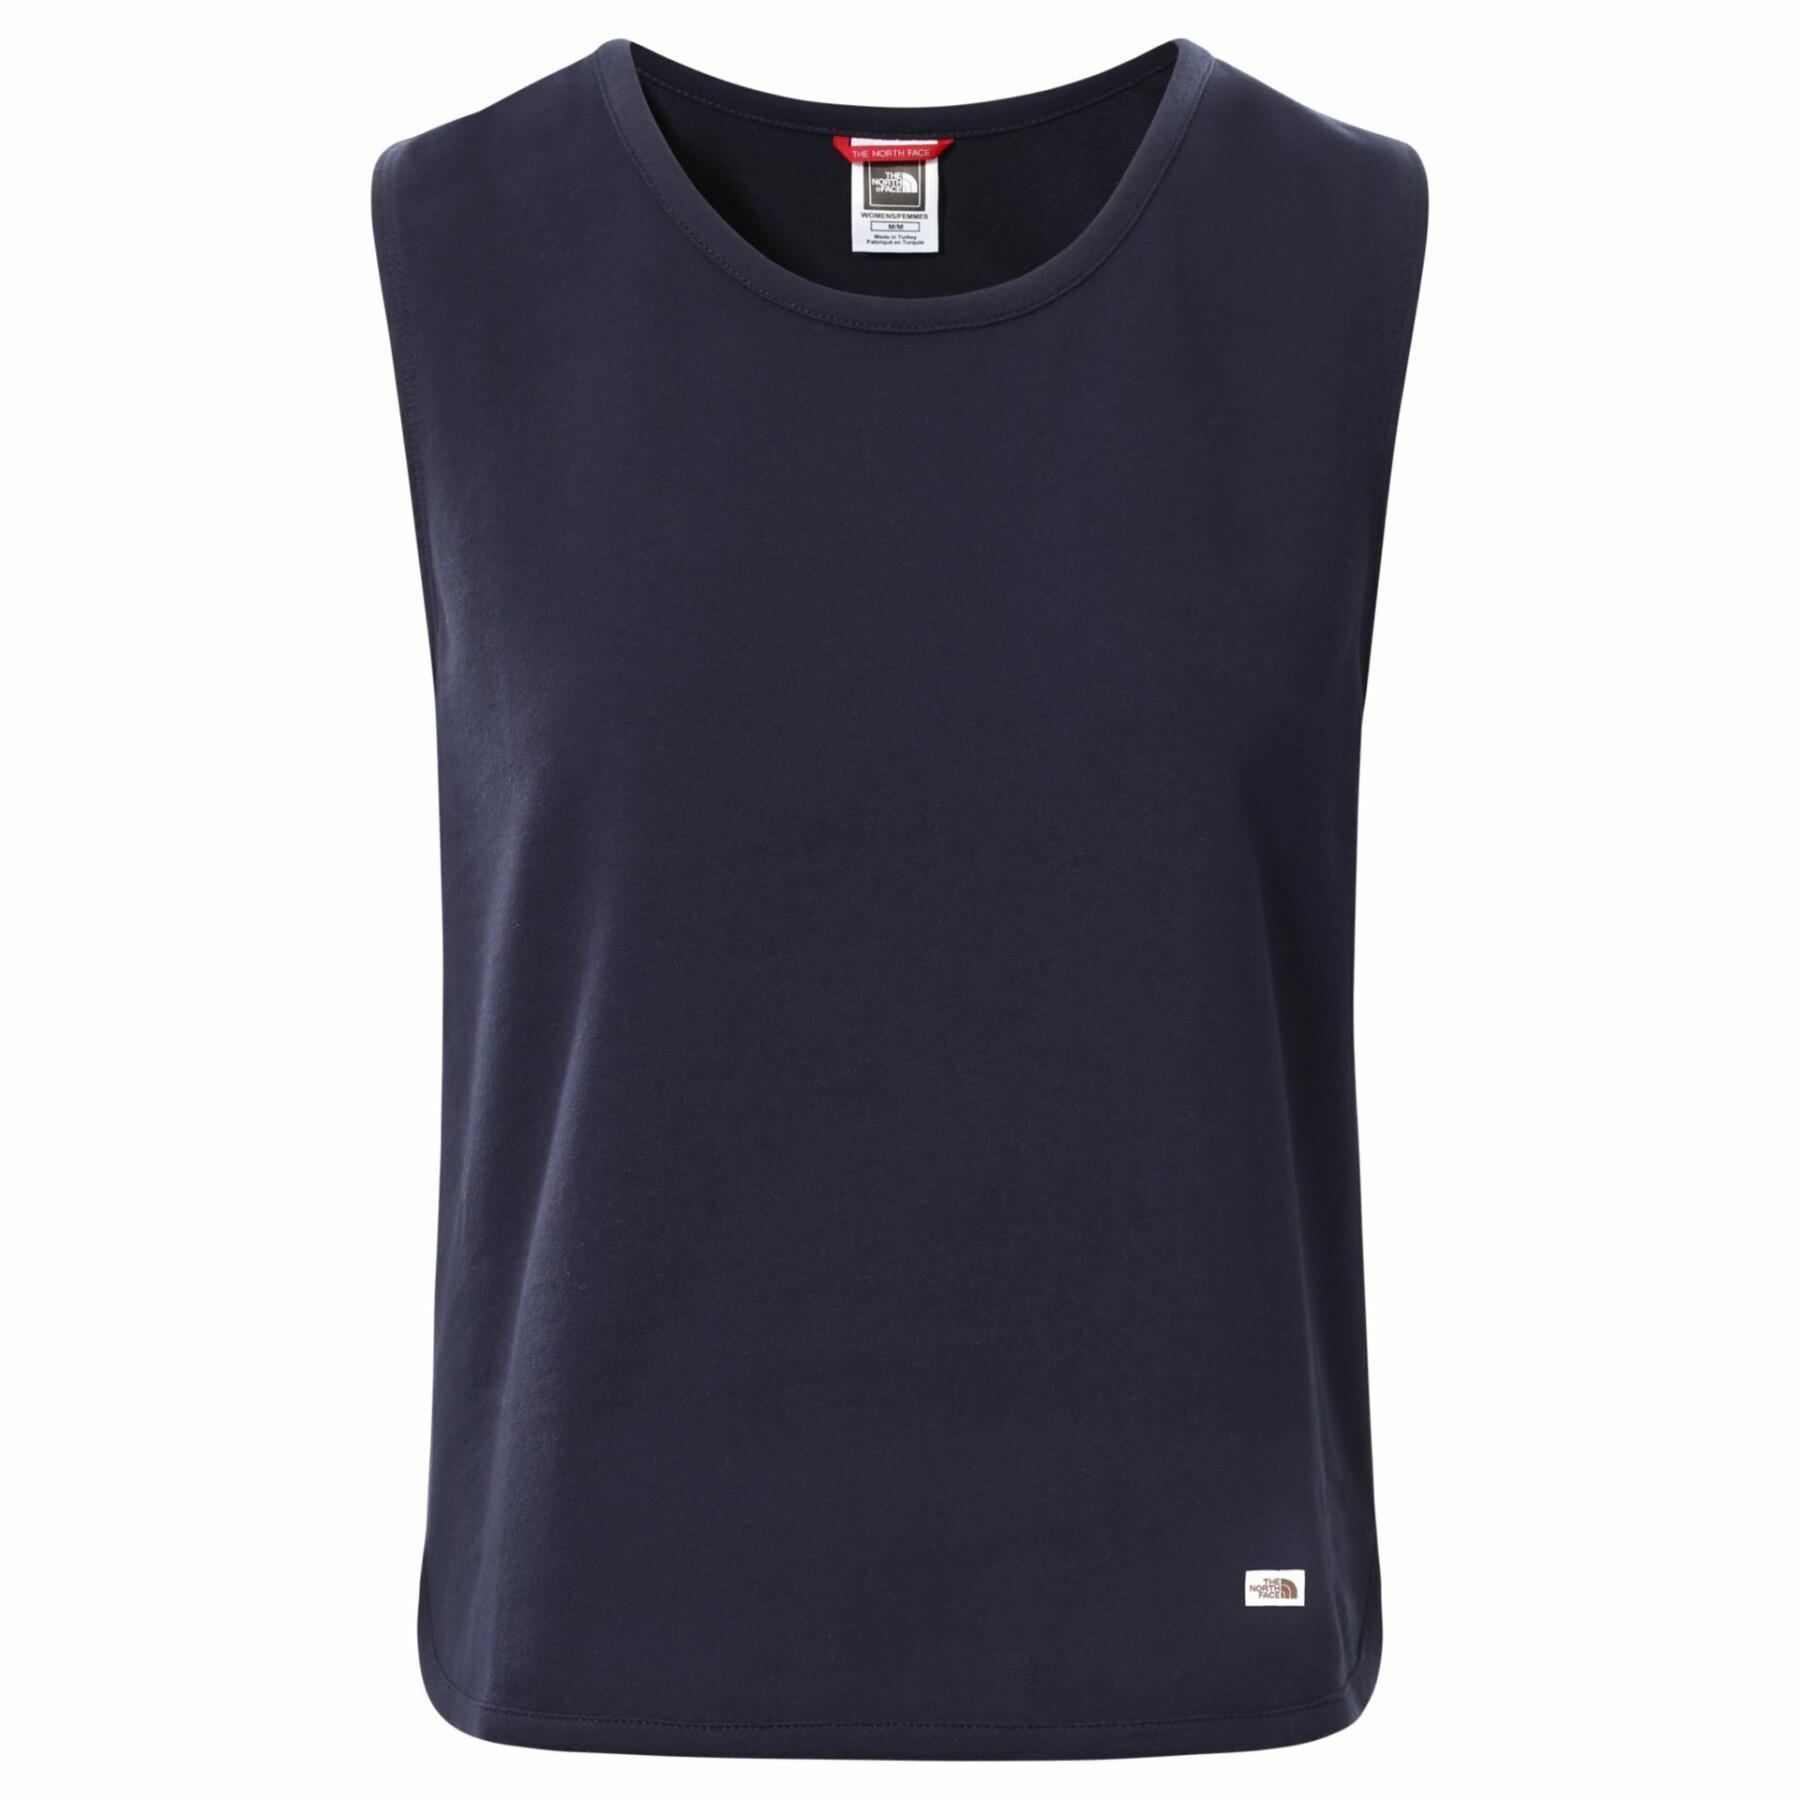 Women's tank top The North Face Heritage Label